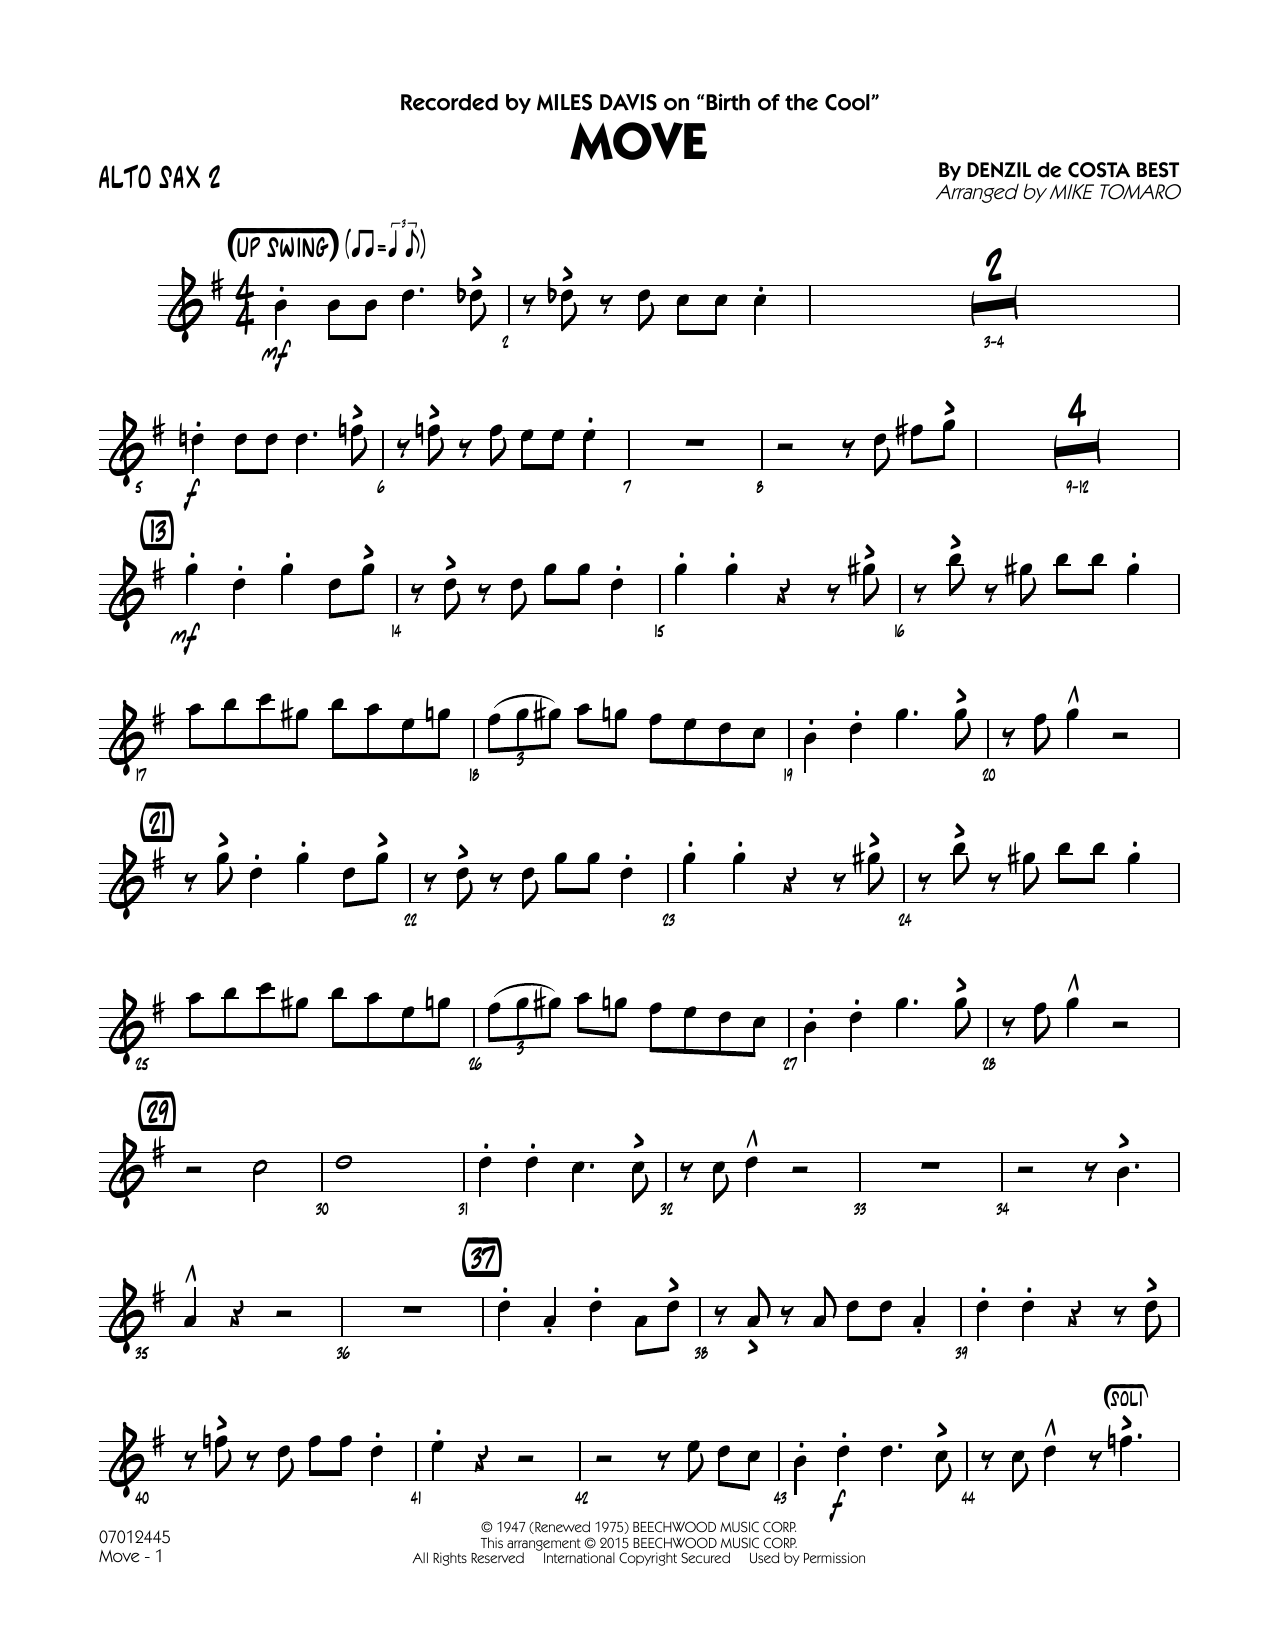 Mike Tomaro Move - Alto Sax 2 sheet music notes and chords. Download Printable PDF.